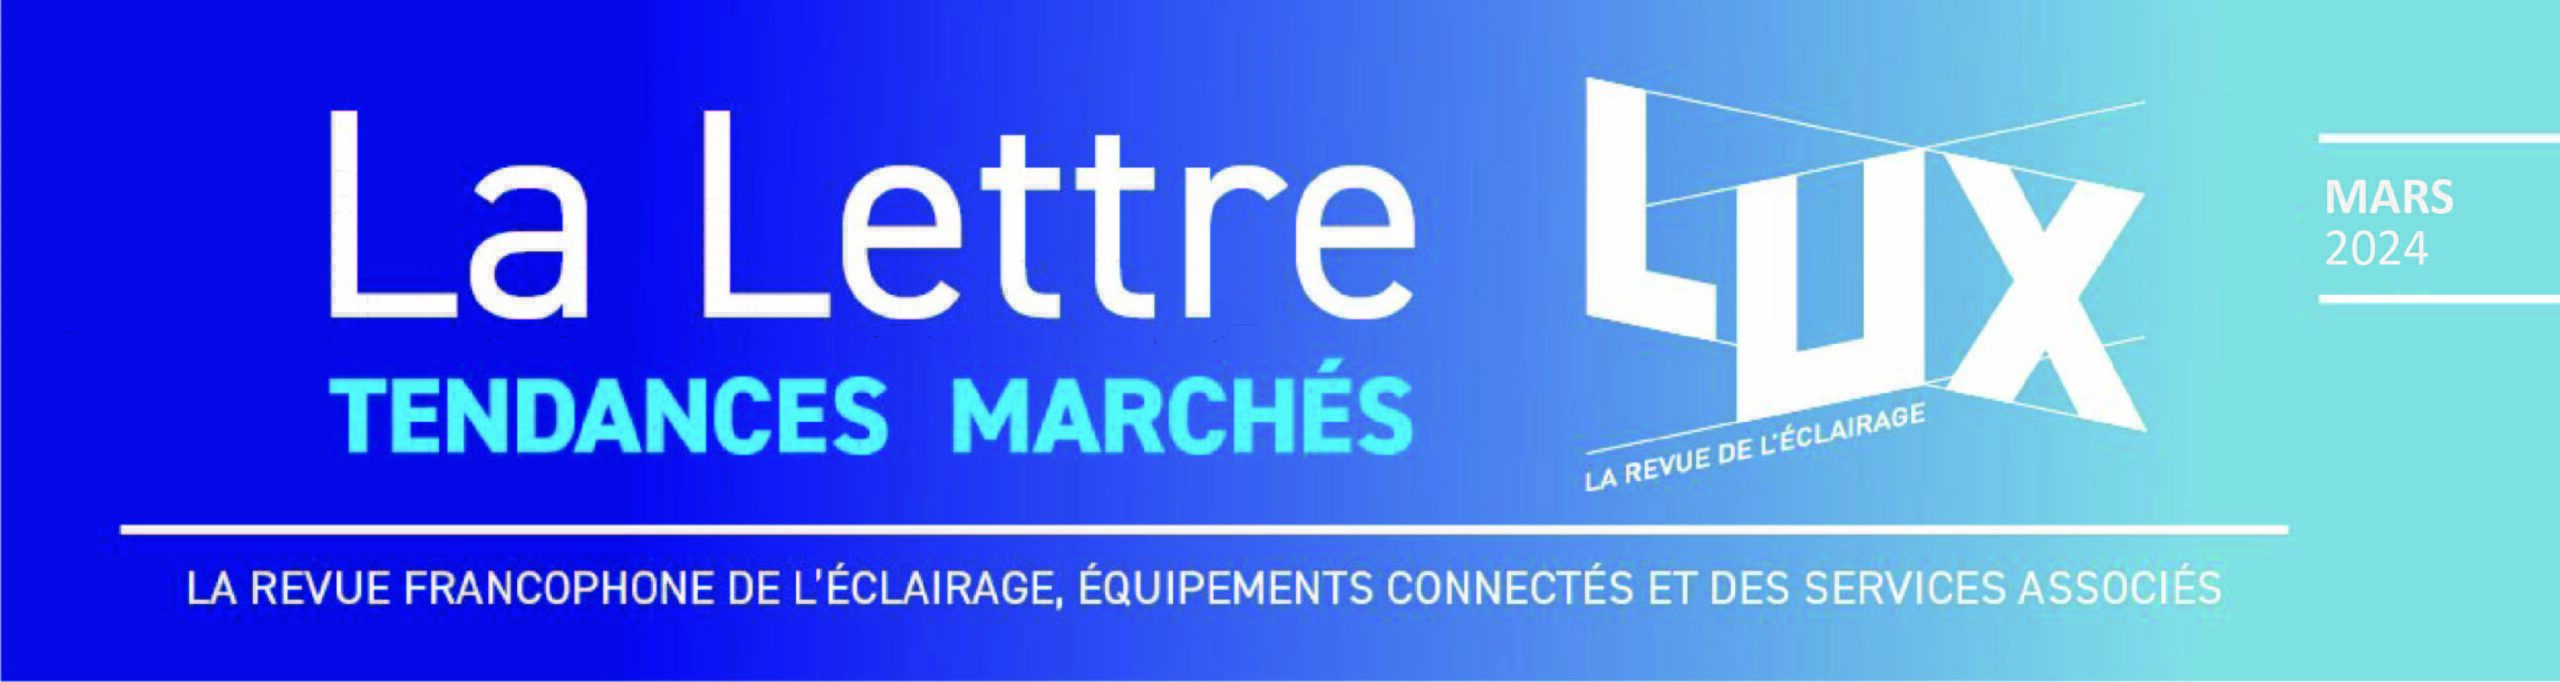 newsletter_LUX_MARCHES_3